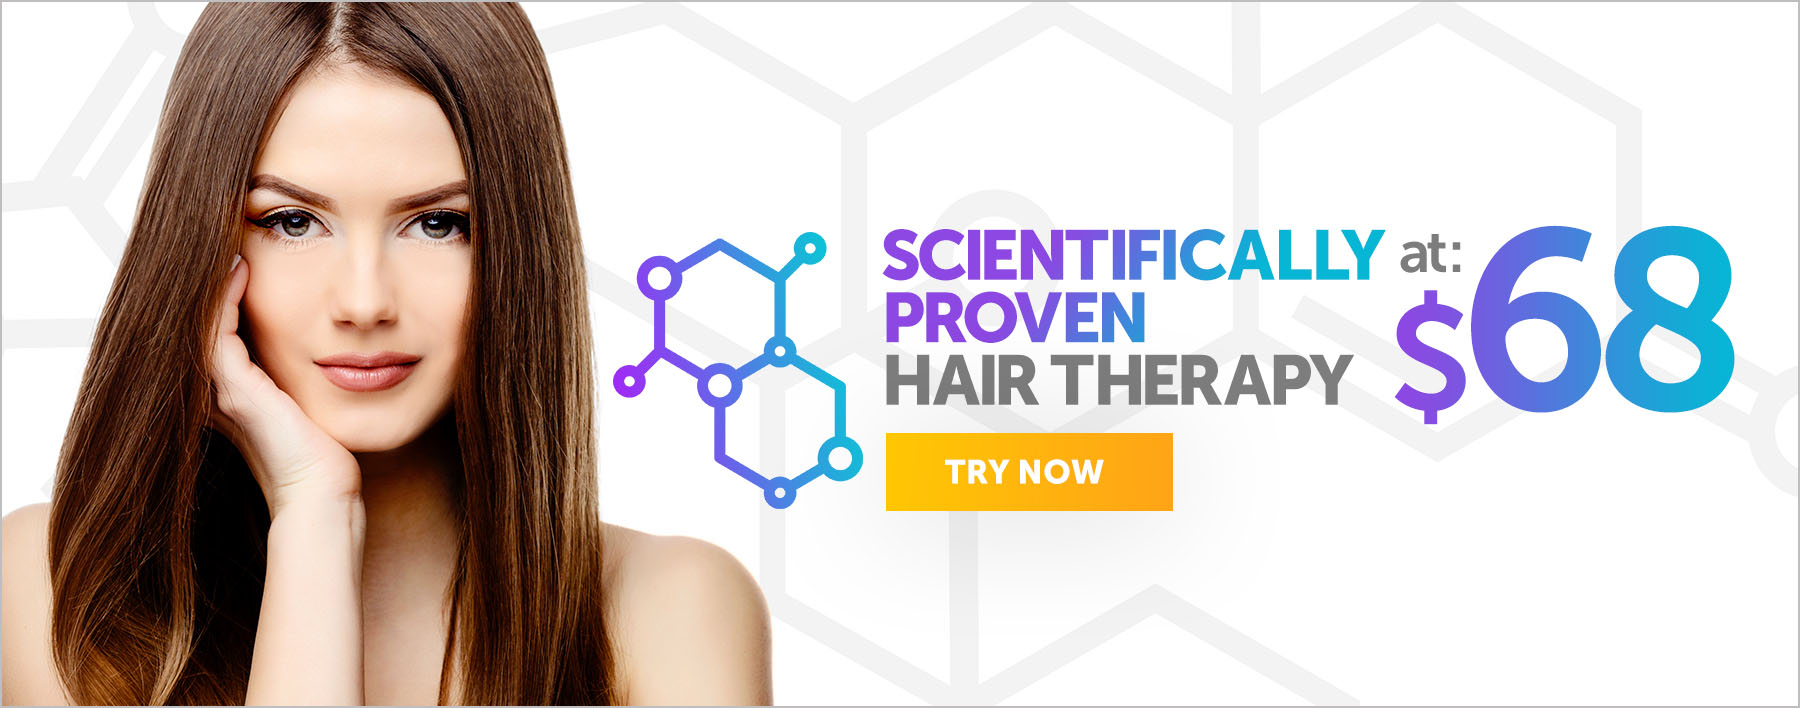 Scientifically Proven Hair Therapy